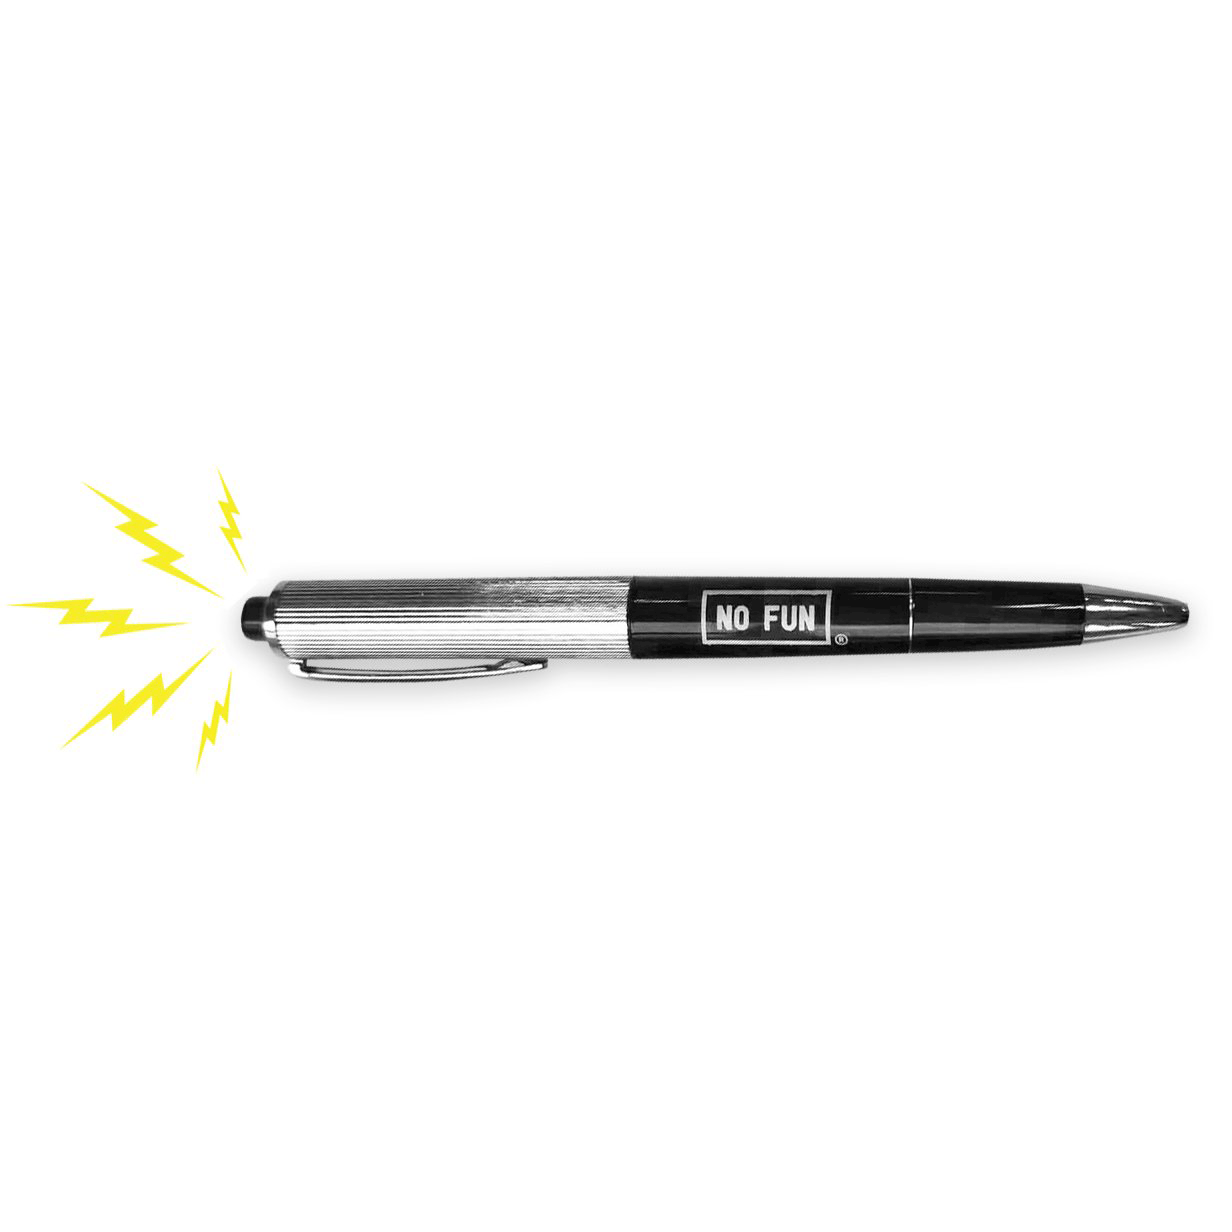 "High Energy" Shocking Pen from No Fun®. A prank, novelty pen that shocks the user when clicked. 